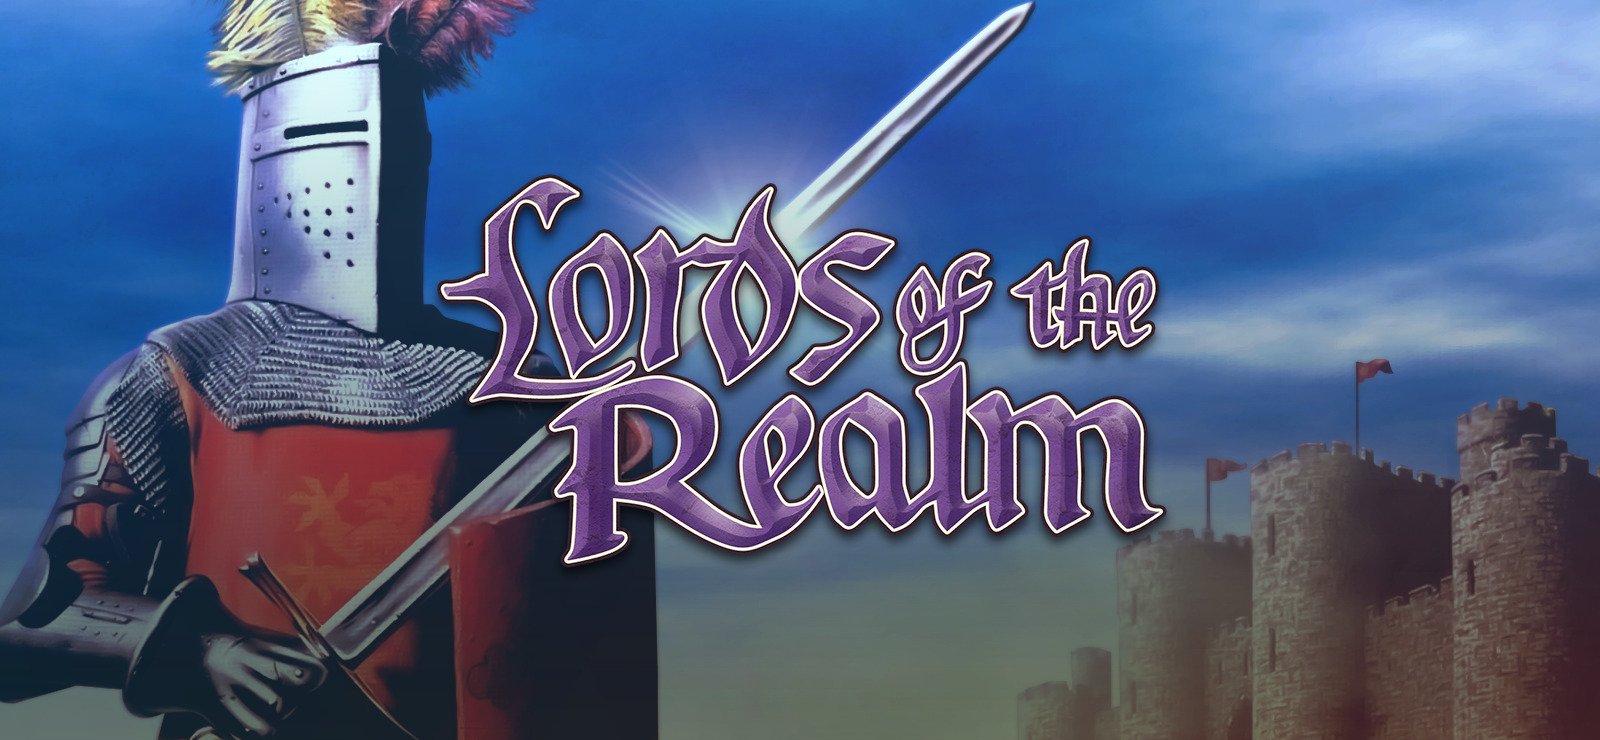 download lords of the realm 2 gog